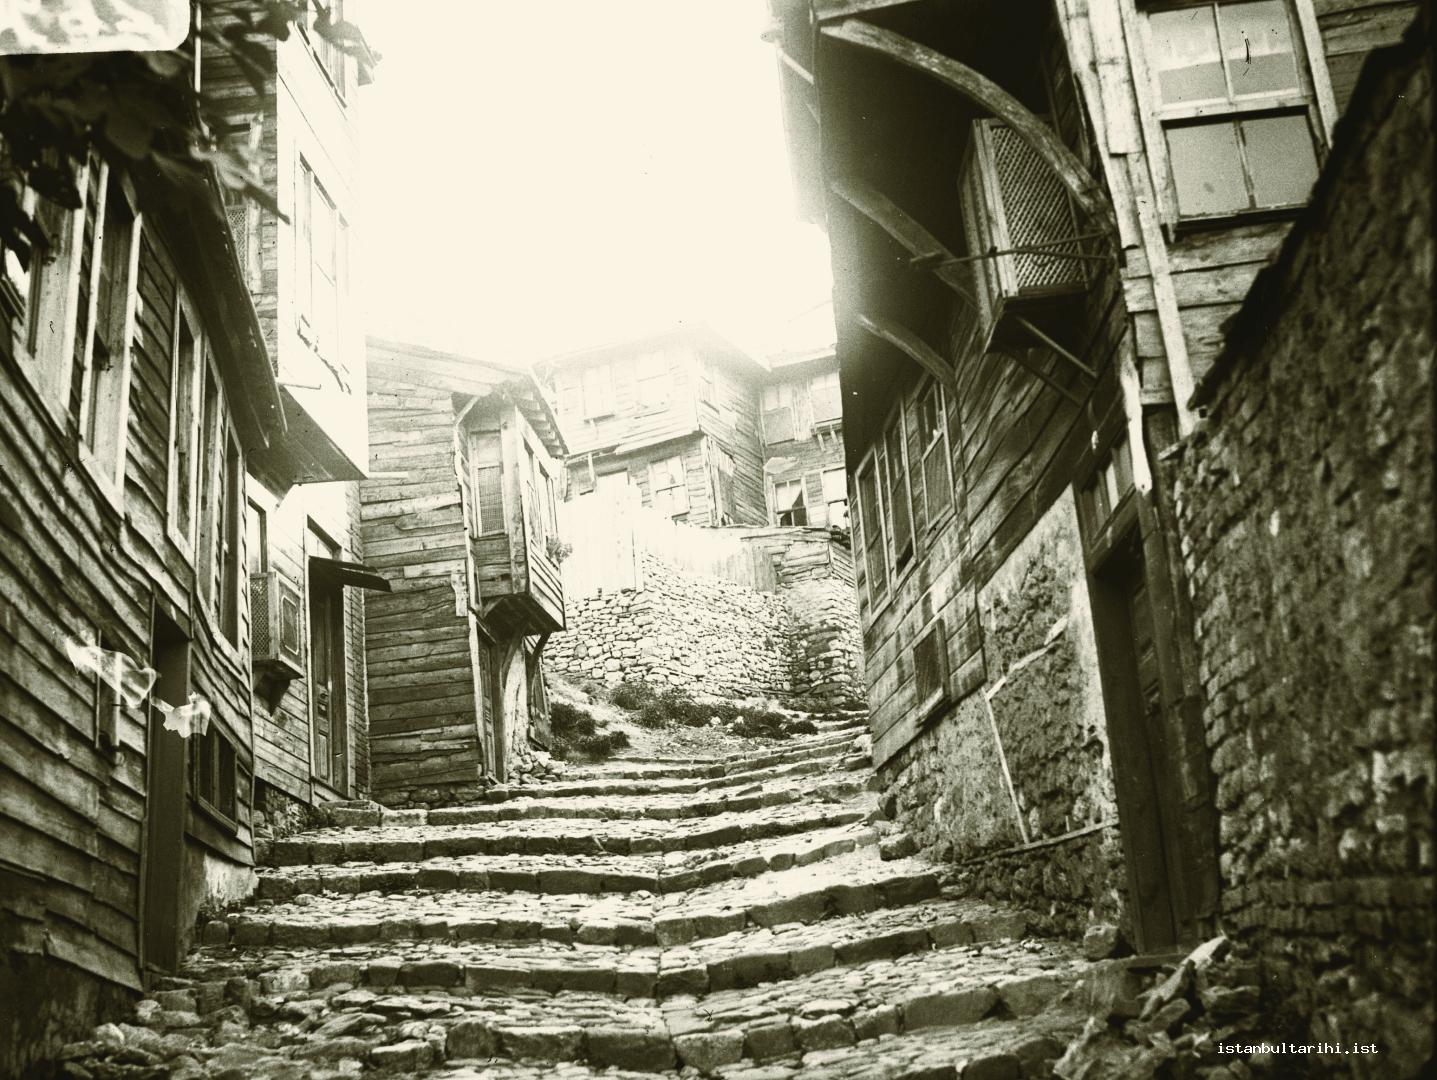 10- One of the streets with stairs in the old Istanbul. There is no doubt this and other similar roads mesmerized the painters and photographers in their prosperous times.